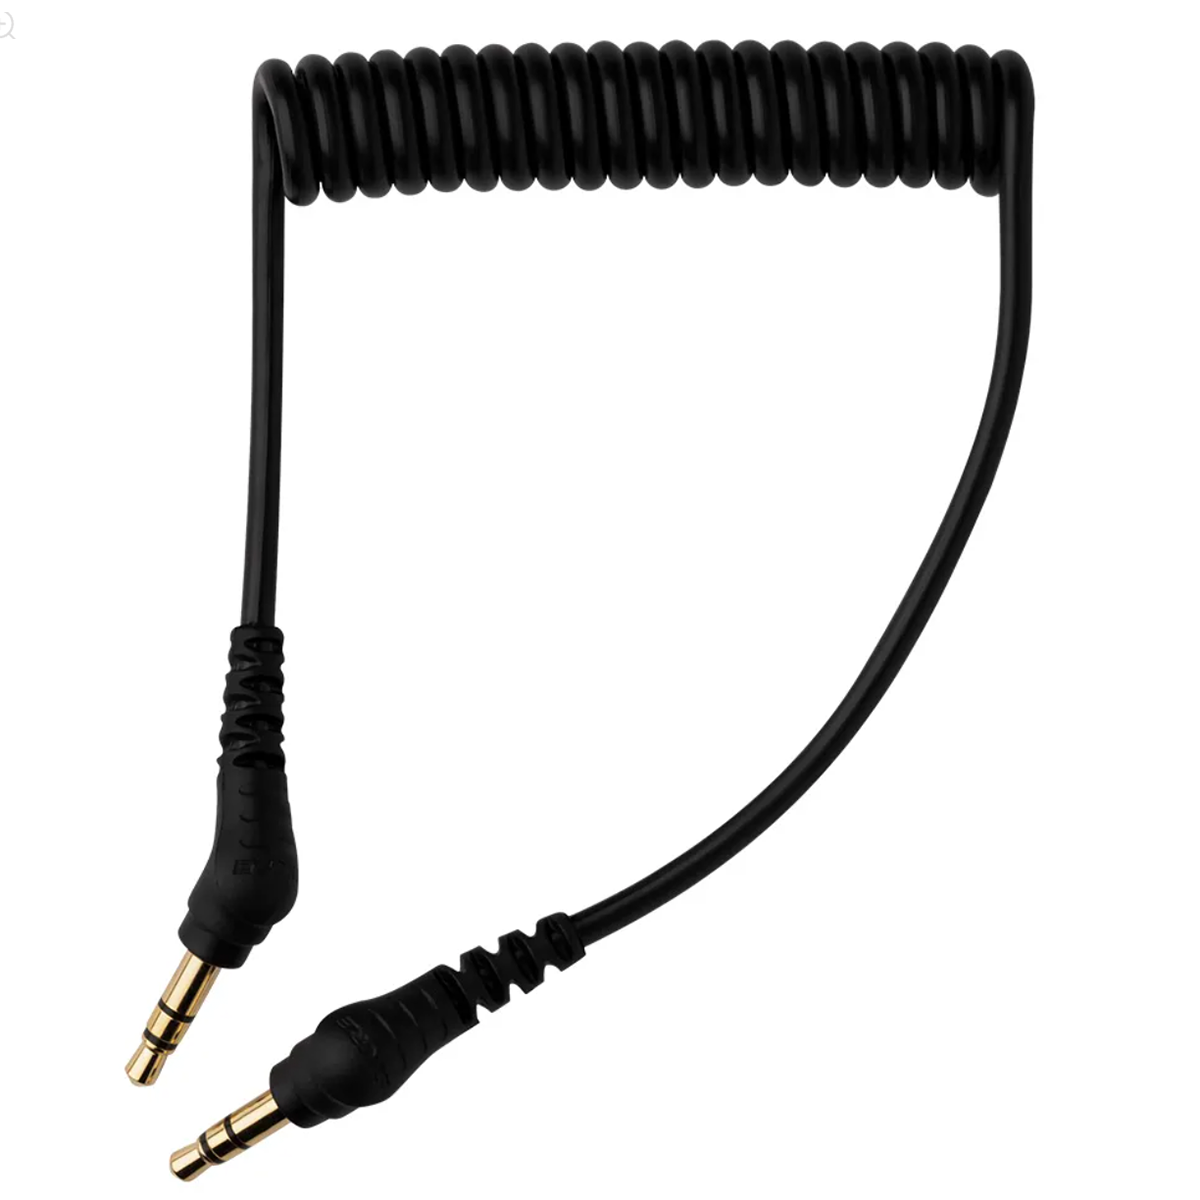 Shure 3.5mm to 3.5mm Cable for MoveMic; Coiled